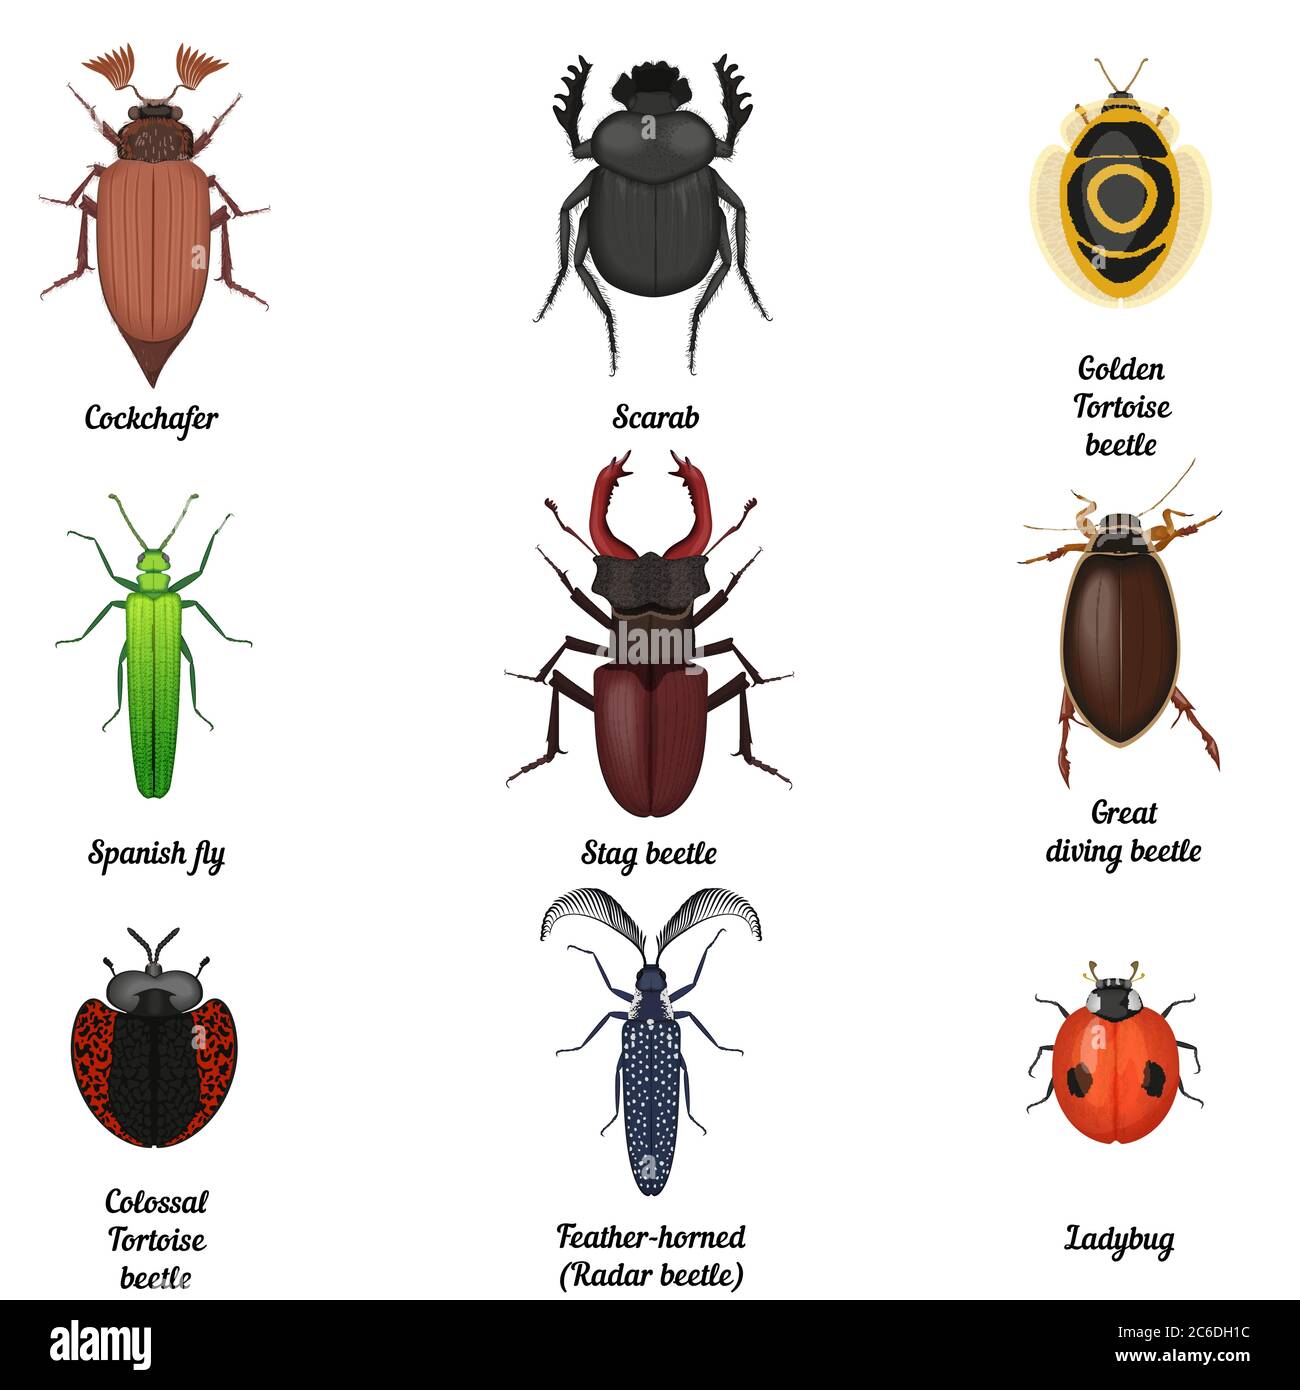 Insect icons set. Beetle bug icon entomological collection. Top view of beetles and bugs Stock Vector